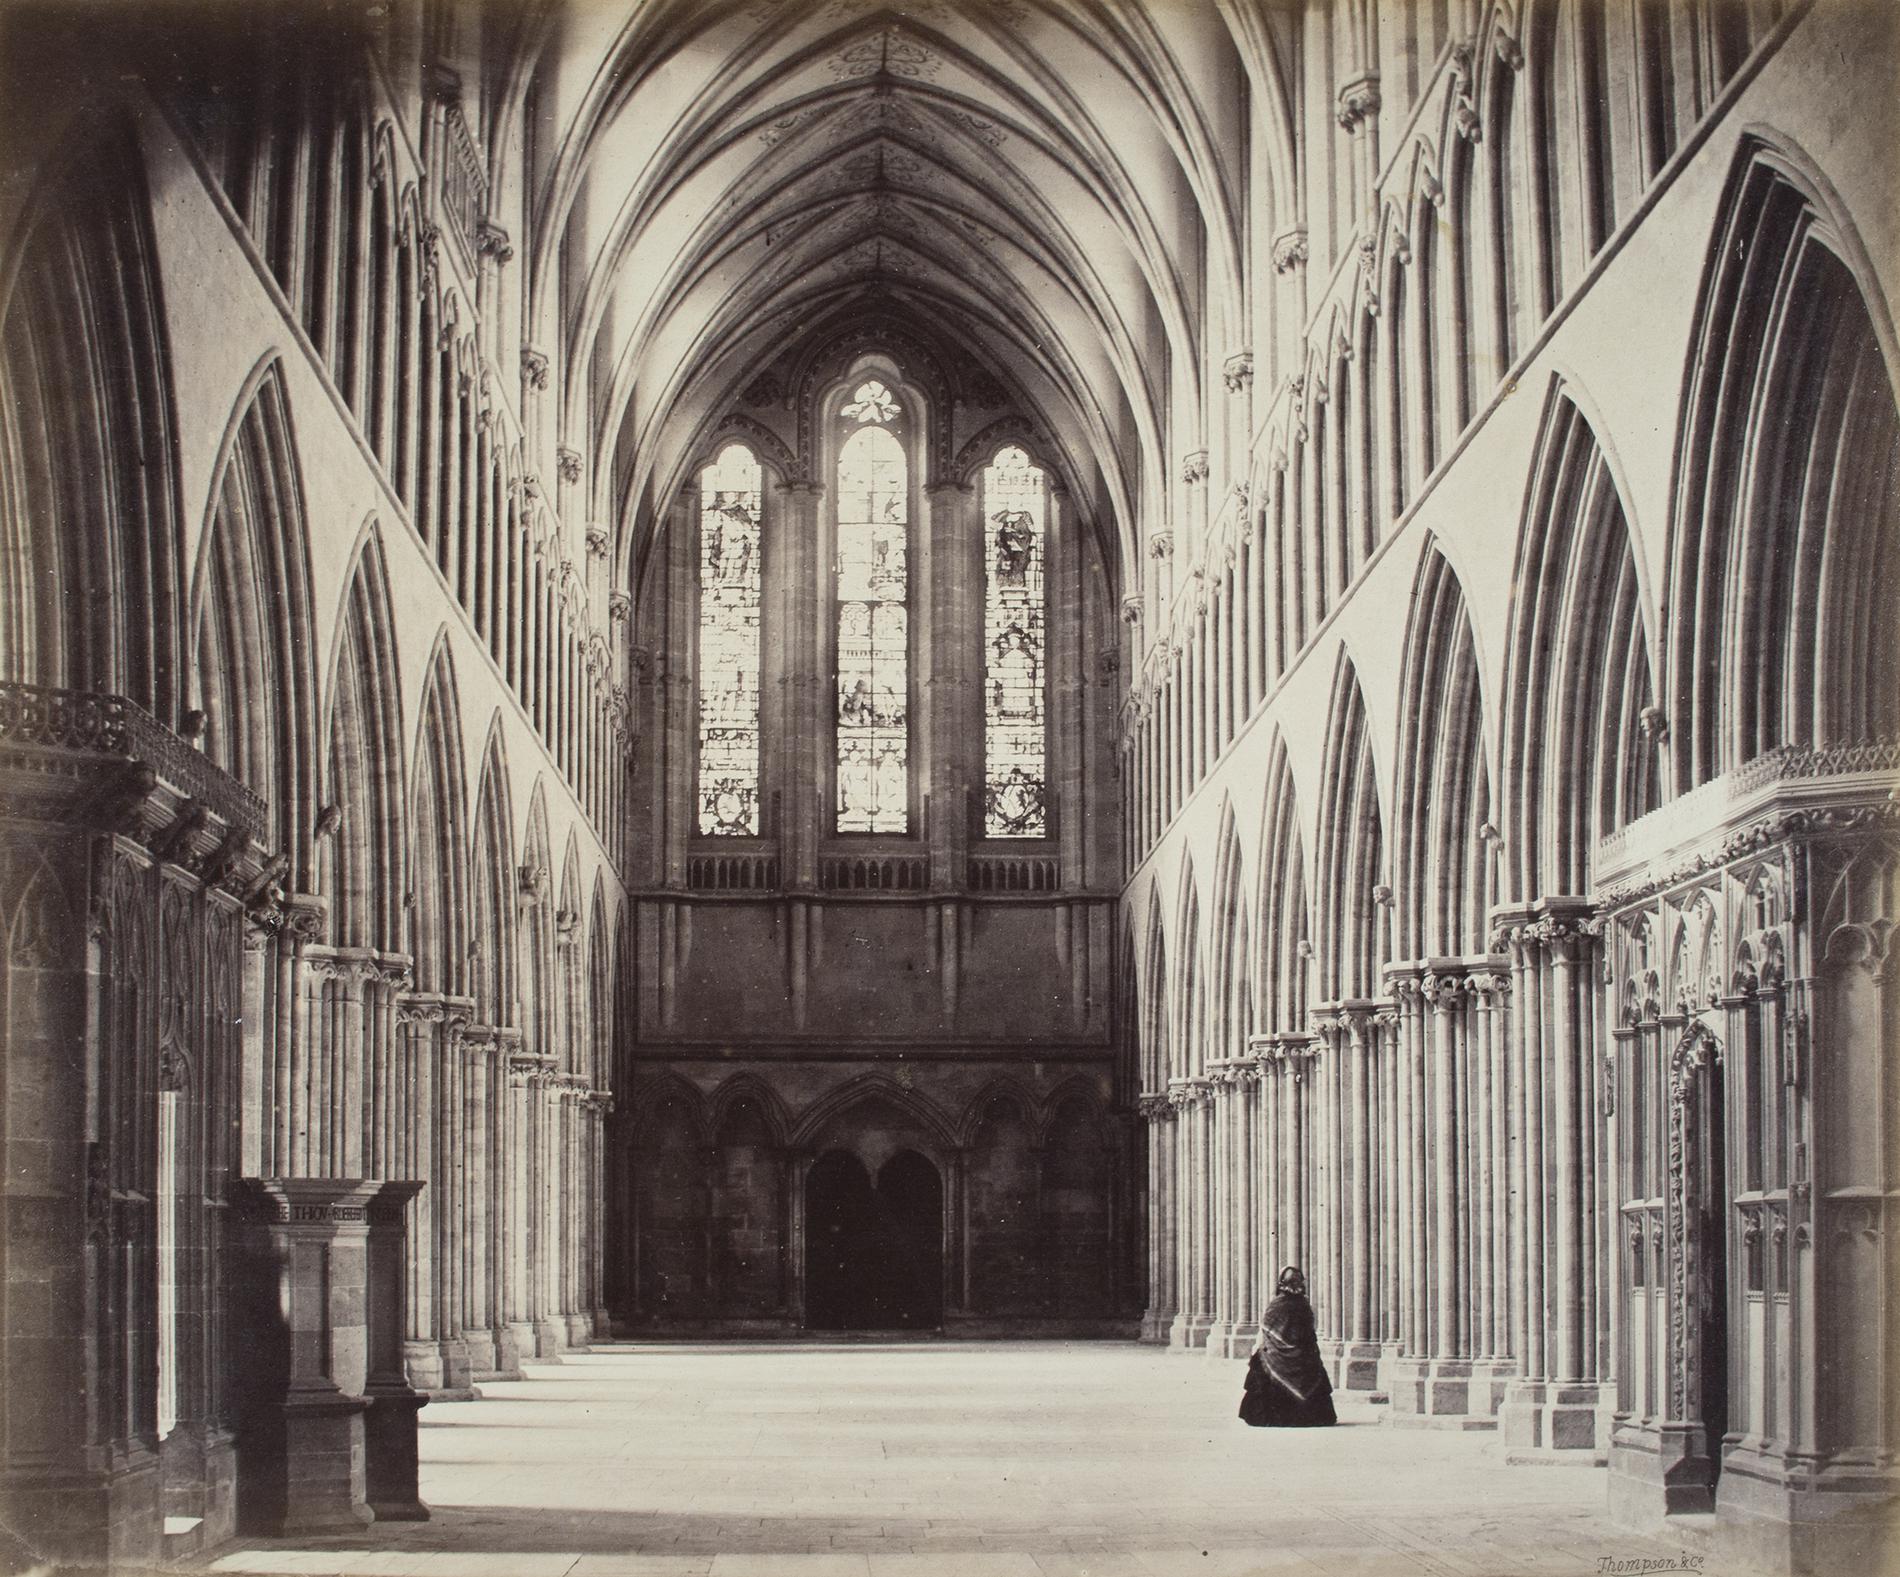 A woman in a dark dress stands in the great hall of a church. Photograph by Francis Bedford.